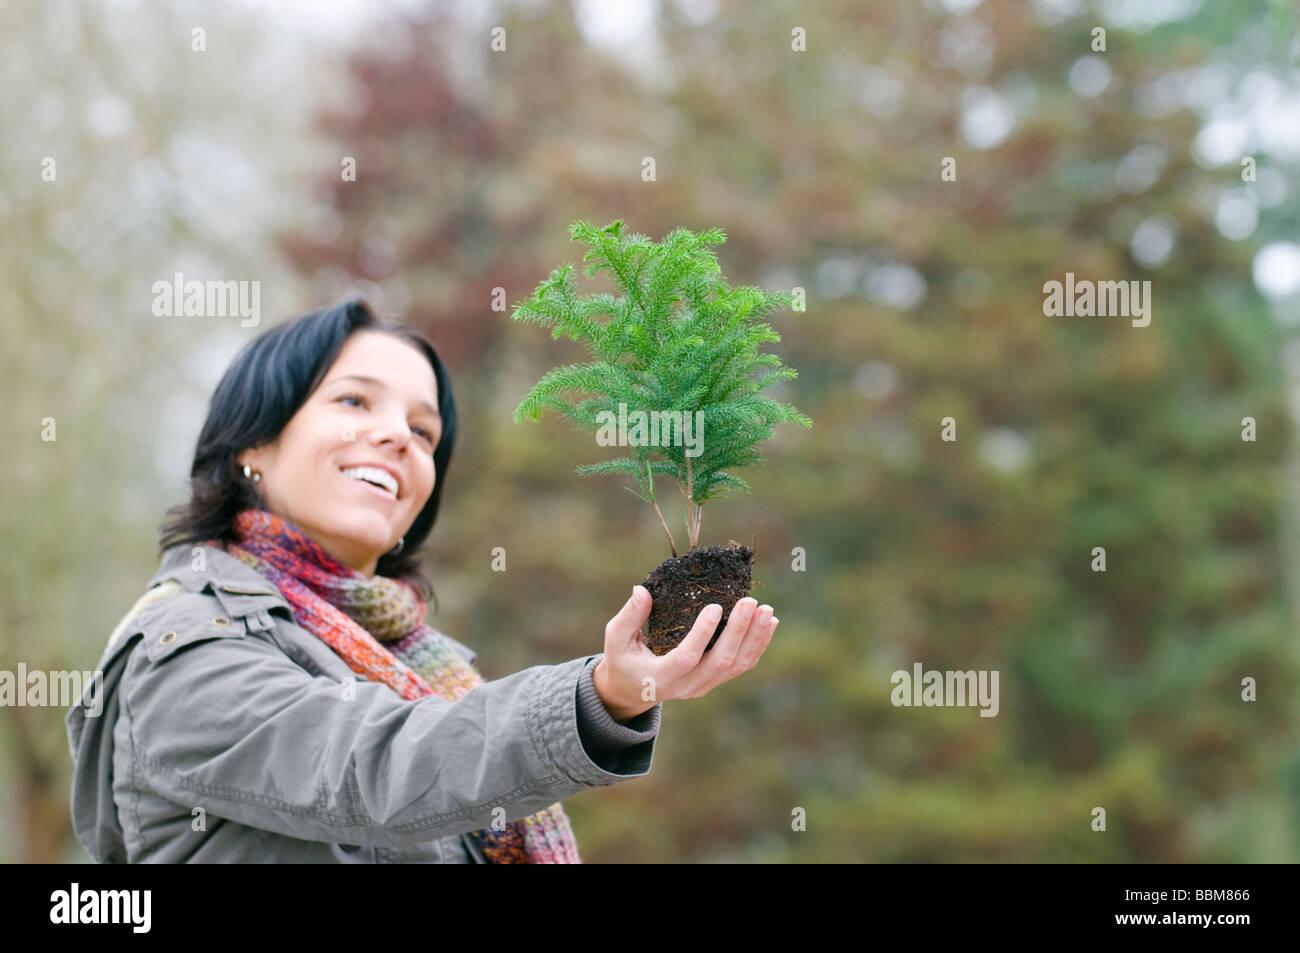 Young woman holding small tree, Vancouver, British Columbia Stock Photo